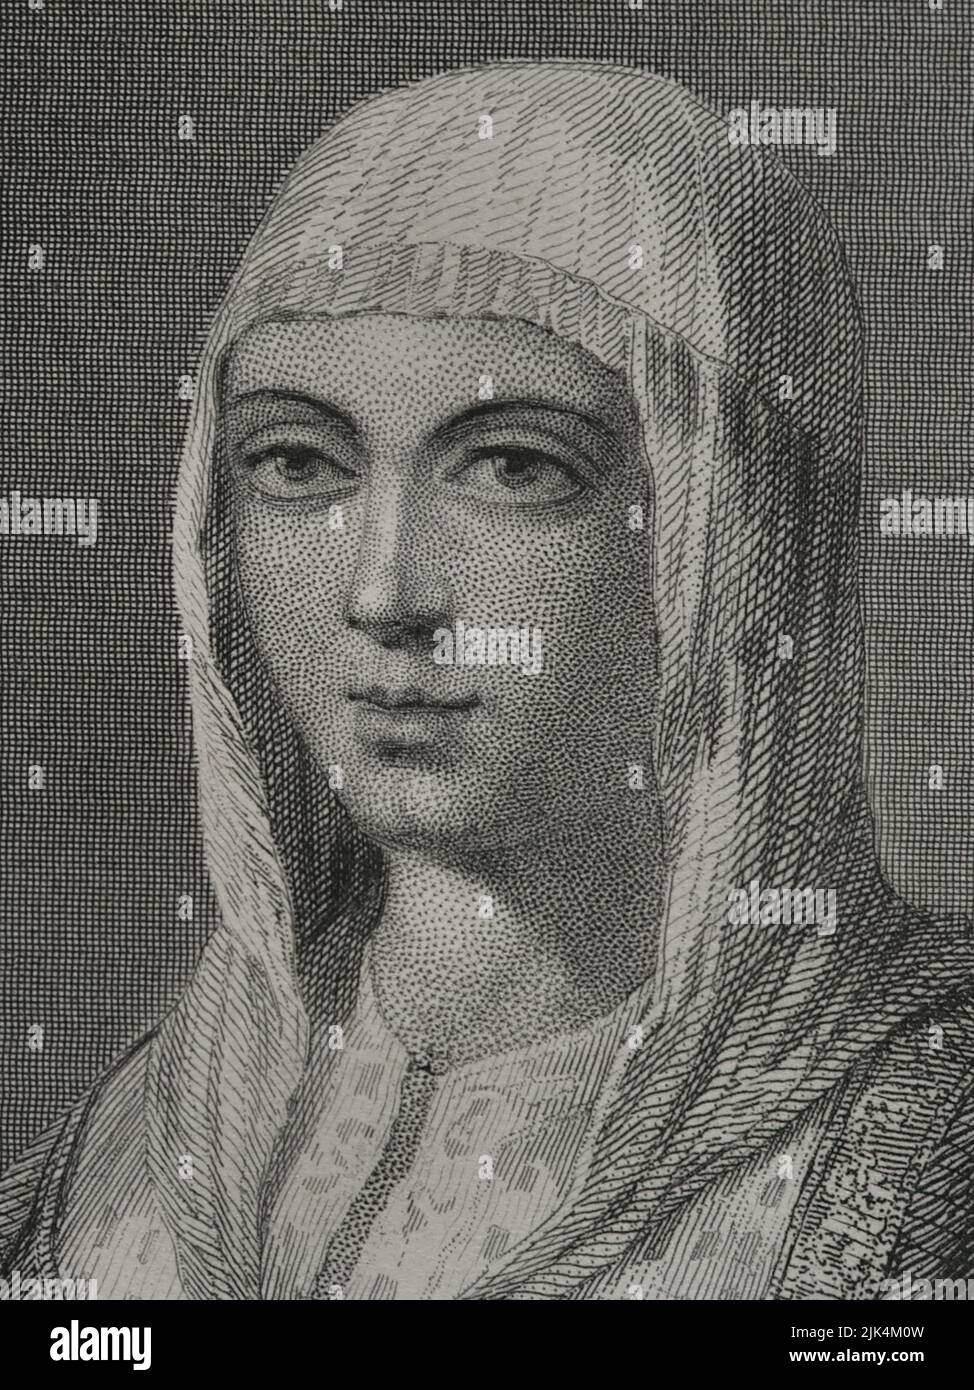 Isabella I (1451-1504). Queen of Castile (1474-1504). Queen consort of Aragon for her marriage to Ferdinand II of Aragon. Portrait. Engraving by Geoffroy. Detail. Historia Universal, by César Cantú. Volume IV, 1856. Stock Photo